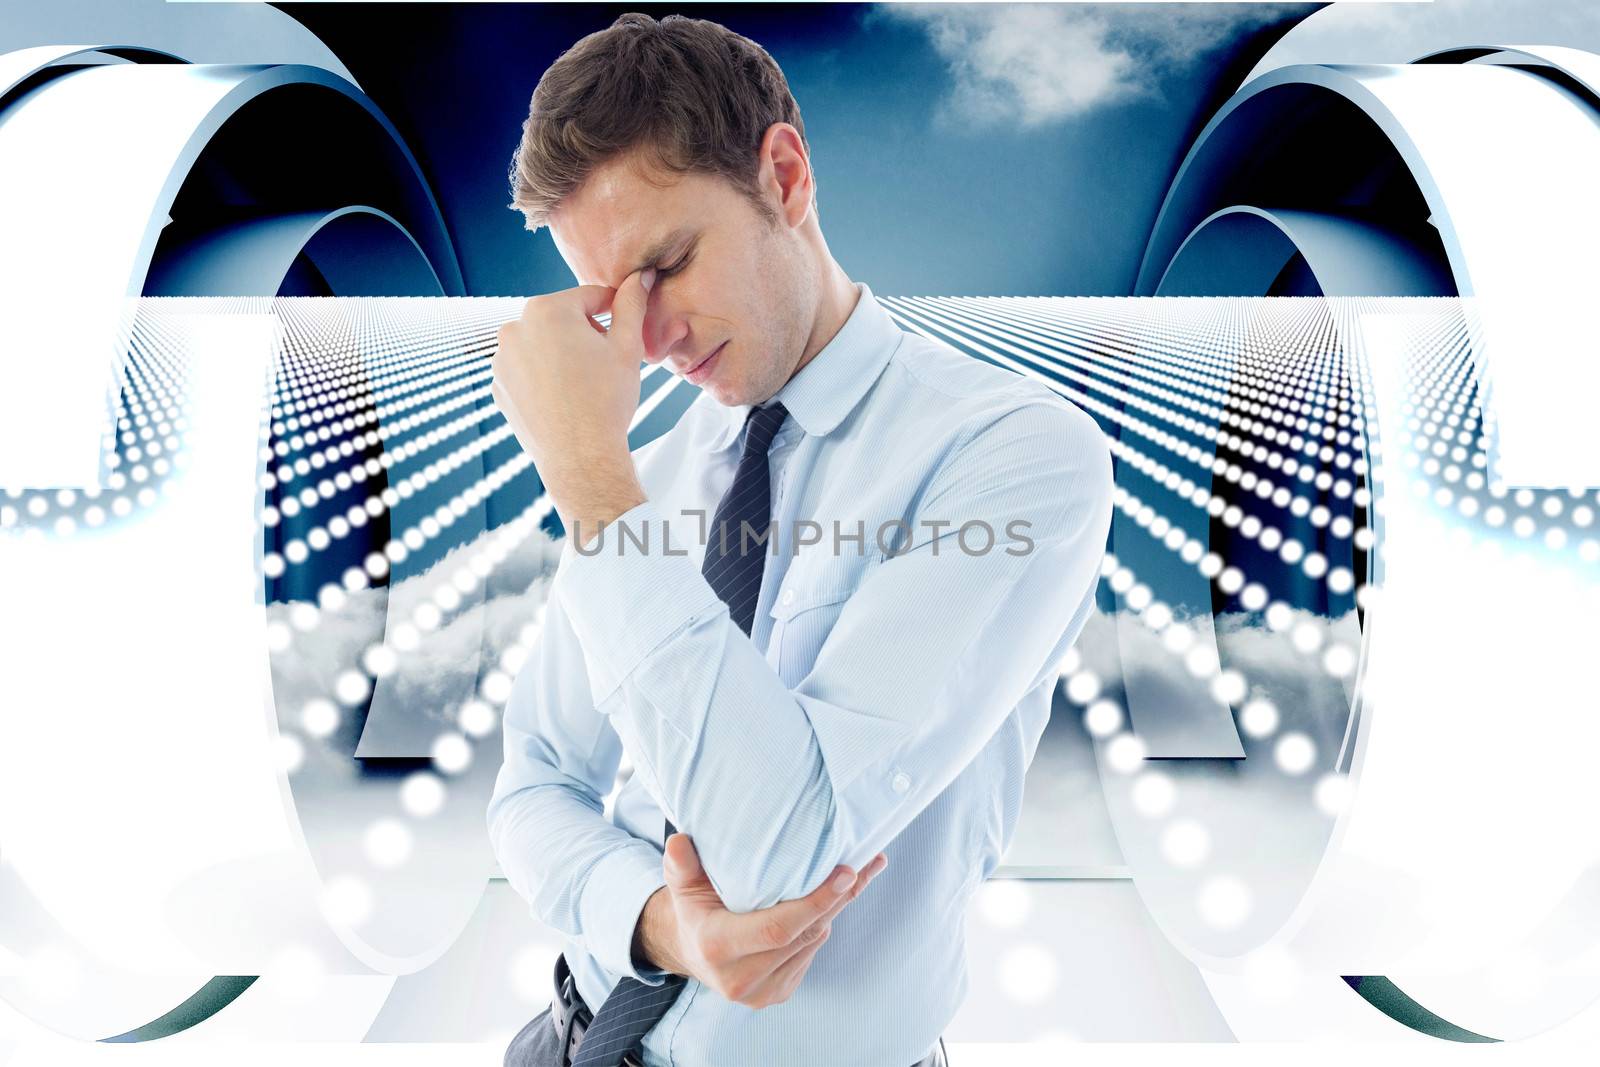 Composite image of businessman with a headache by Wavebreakmedia